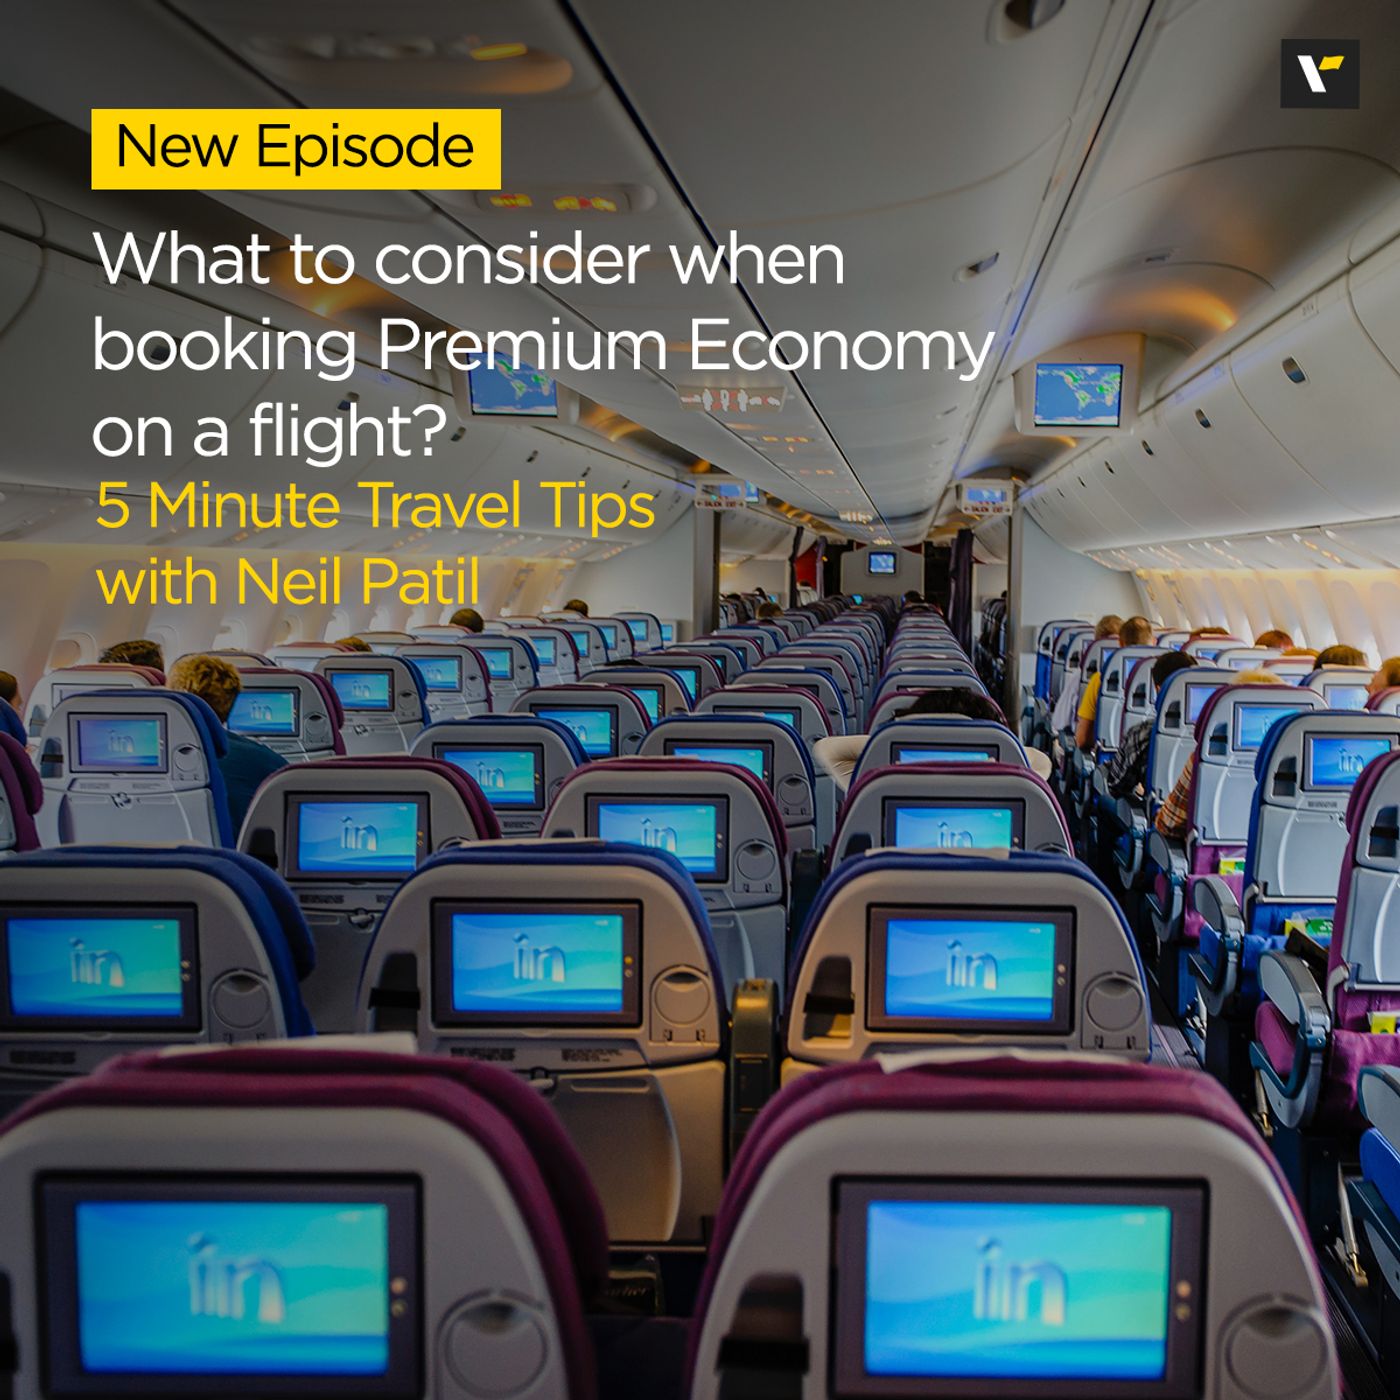 What to consider when booking Premium Economy on a flight?